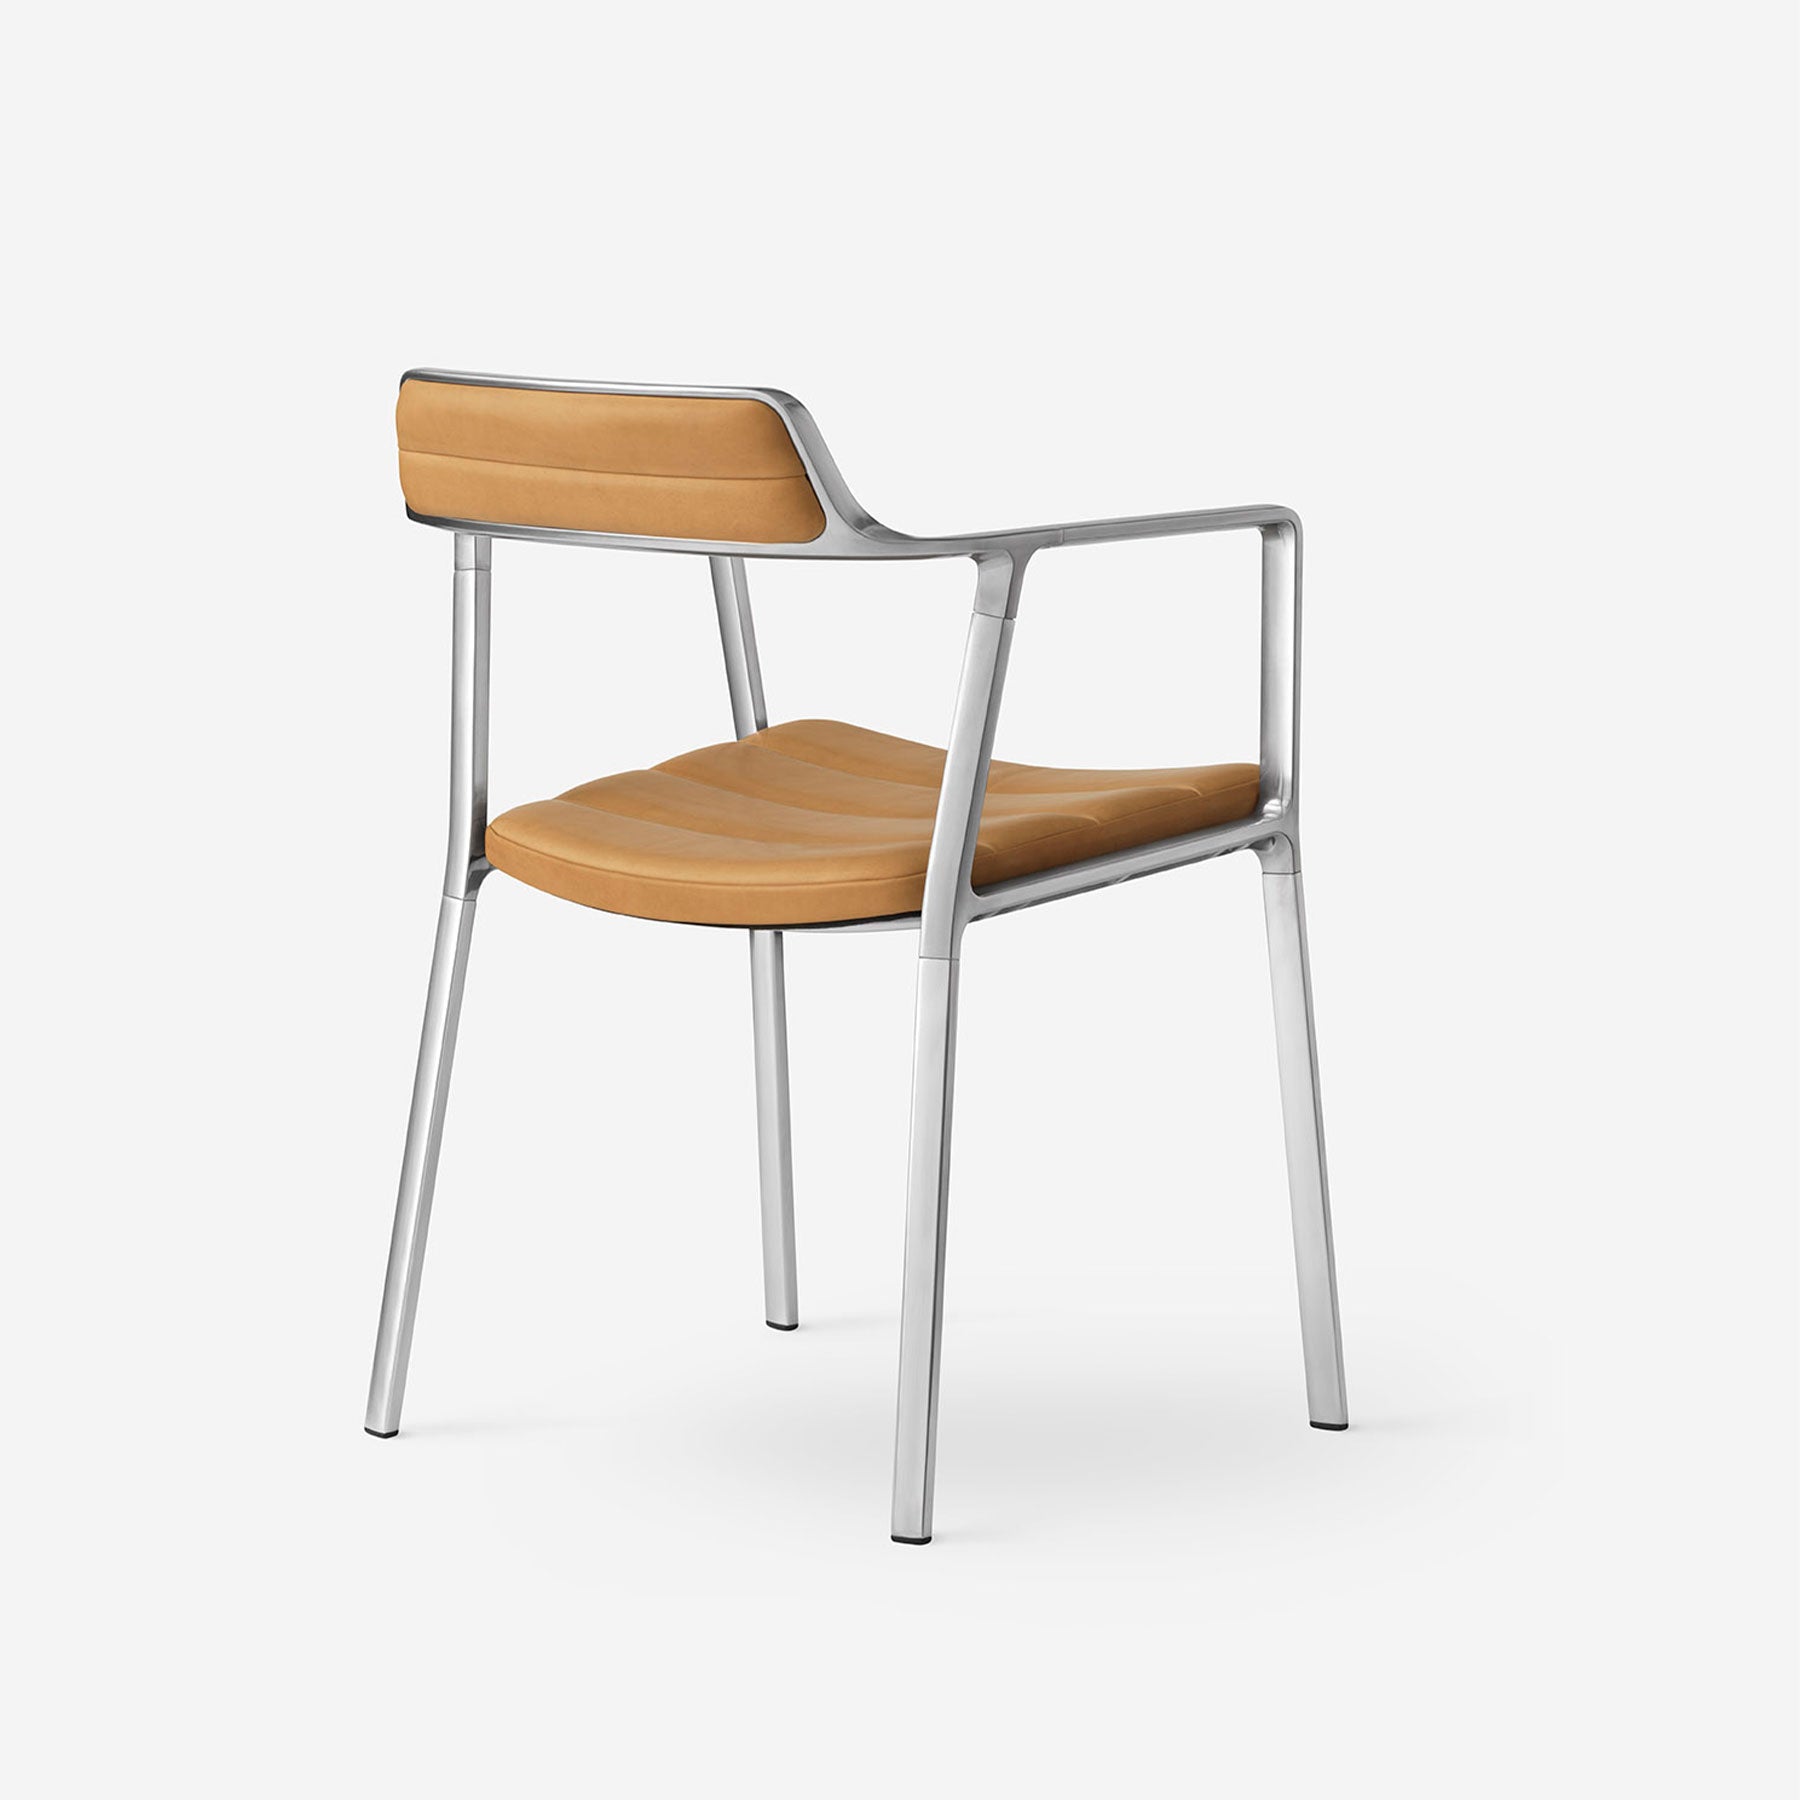 VIPP451 Chair, Polsihed